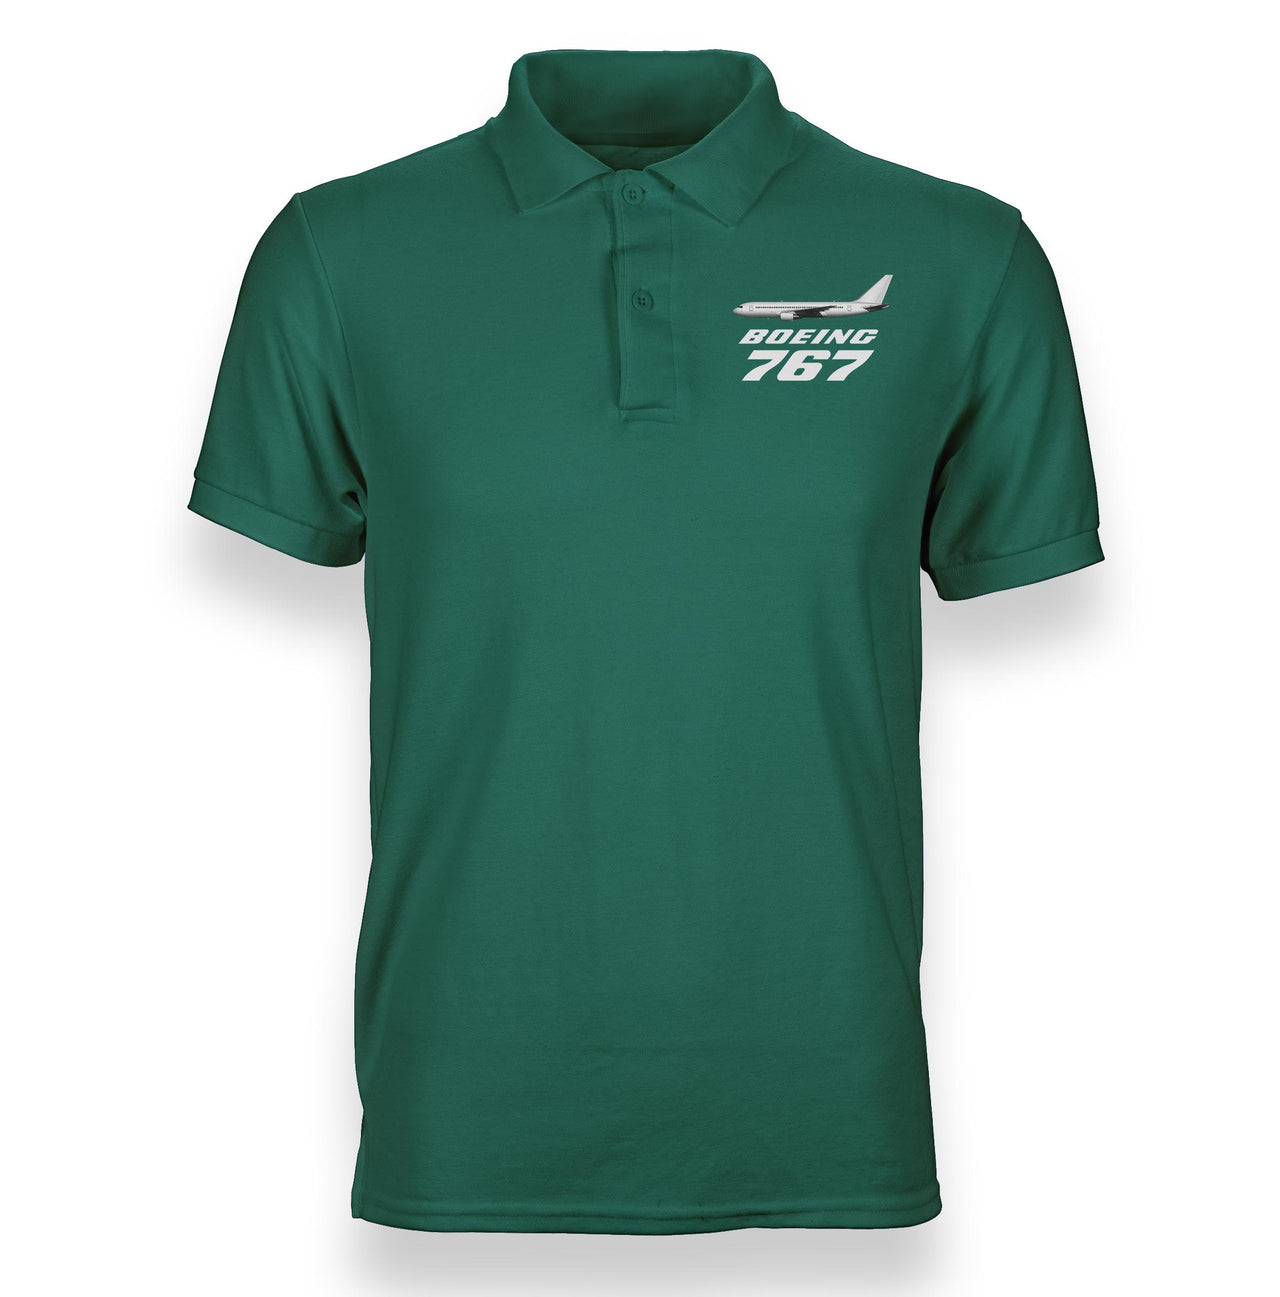 The Boeing 767 Designed Polo T-Shirts